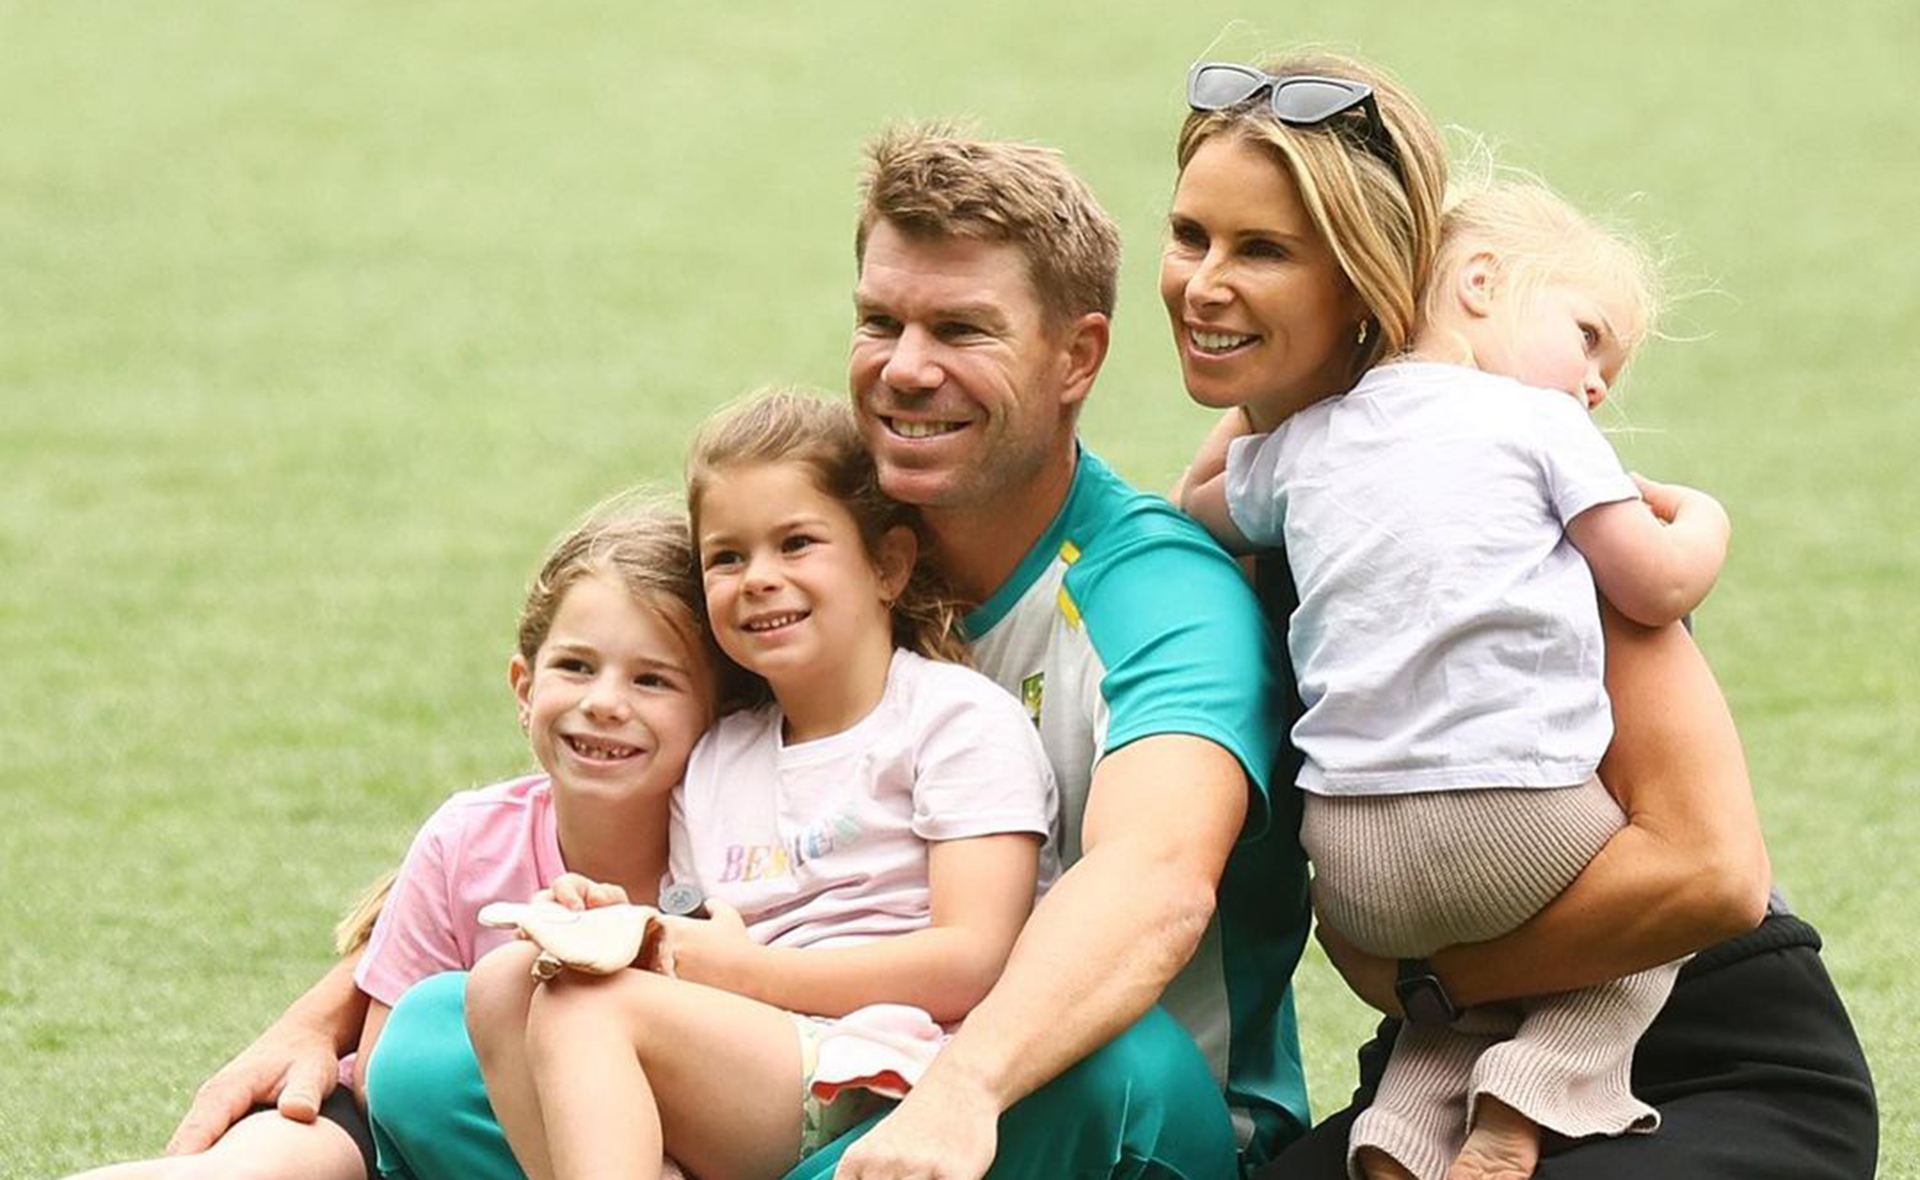 EXCLUSIVE: “Extremely tough but very rewarding”: Candice Warner airs the realities of being a mum-of-three